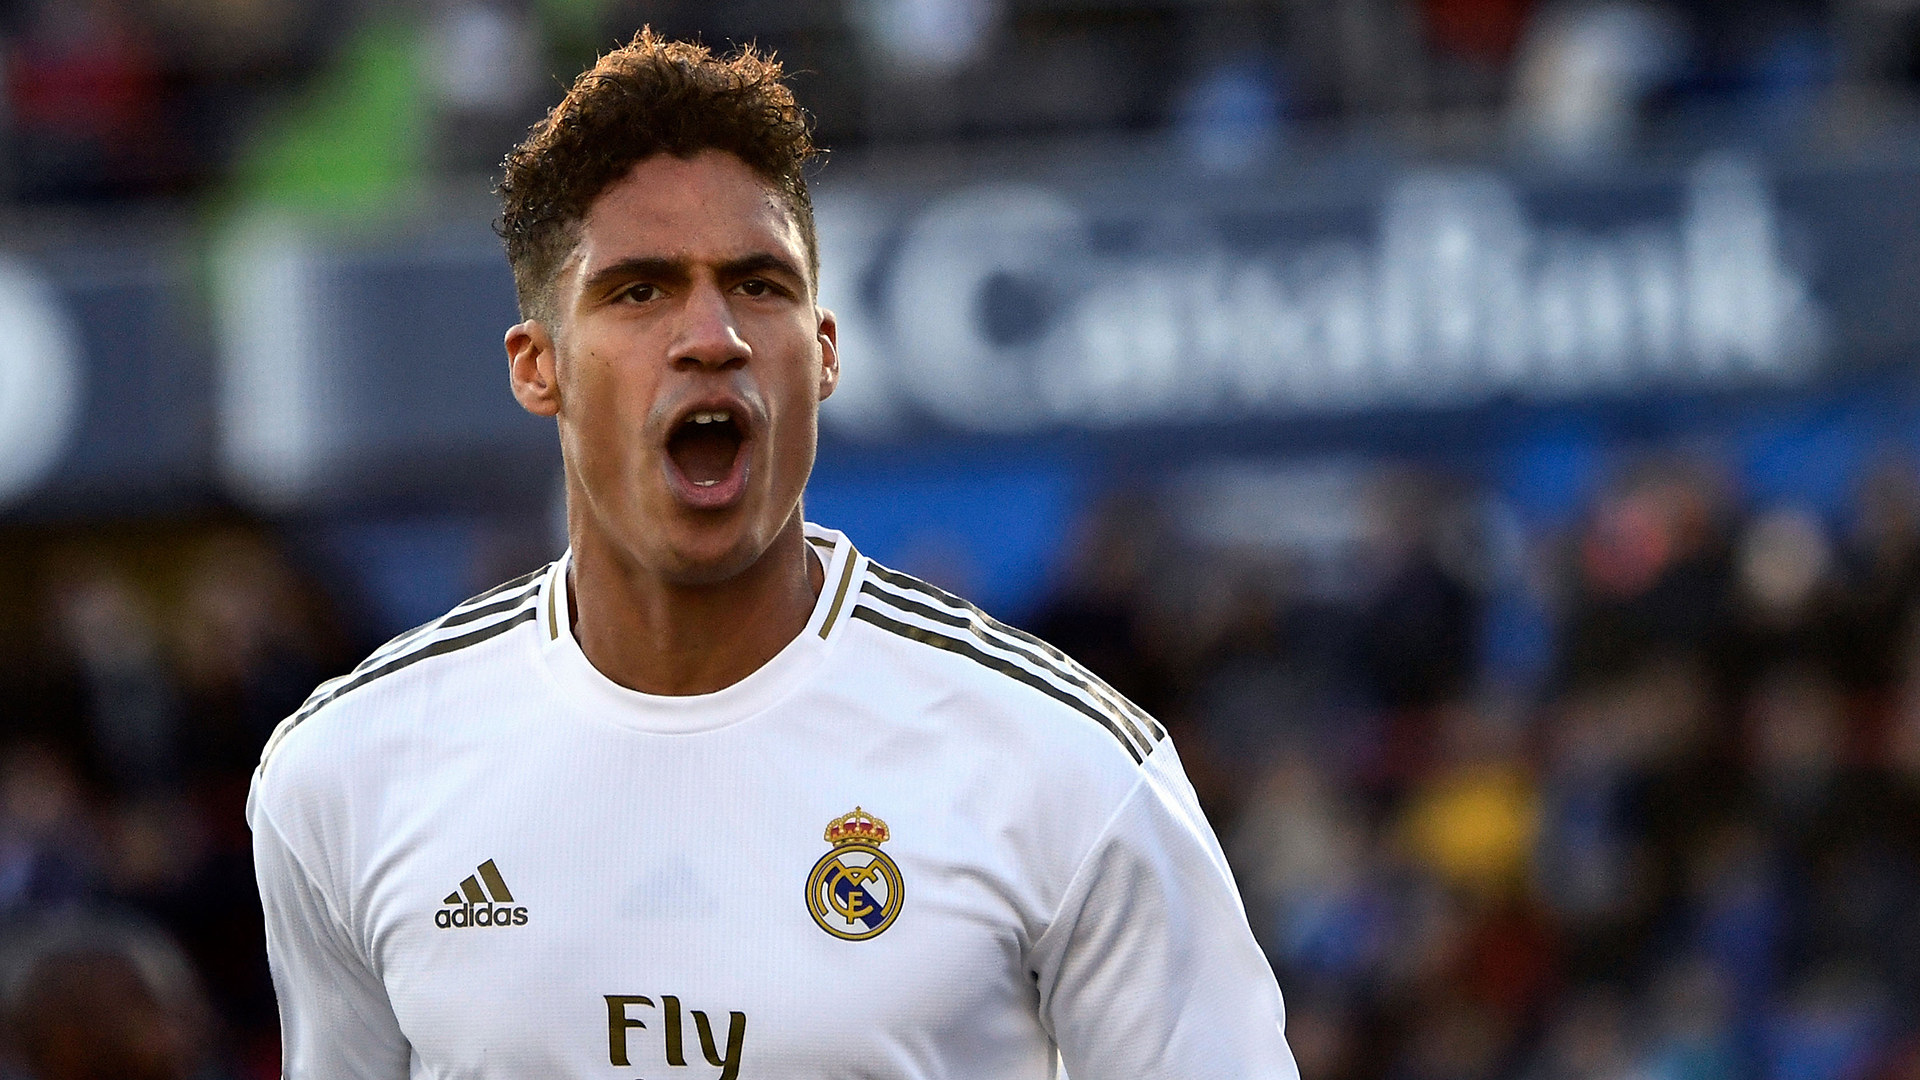 'Anything is possible against Man City' - Varane confident Real Madrid can progress in Champions League